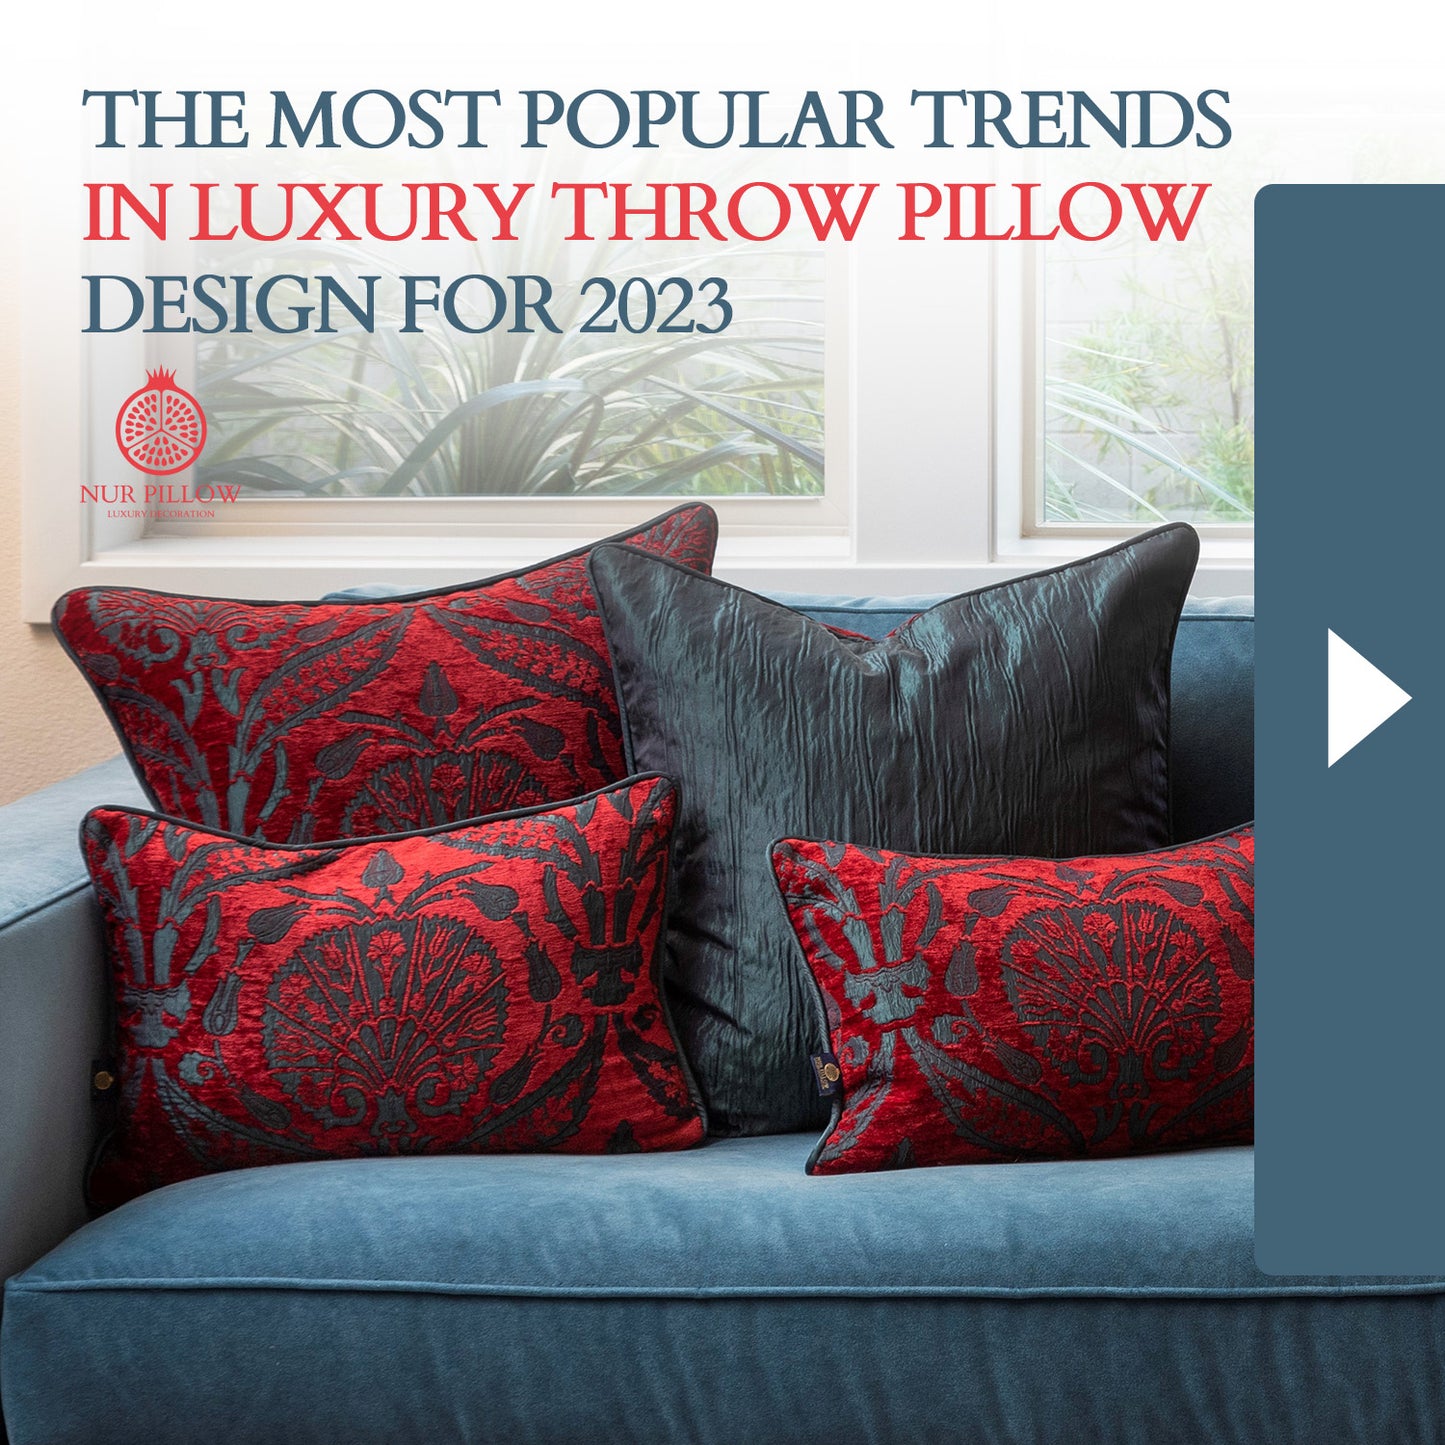 Where to Buy The Best Throw Pillows in 2023